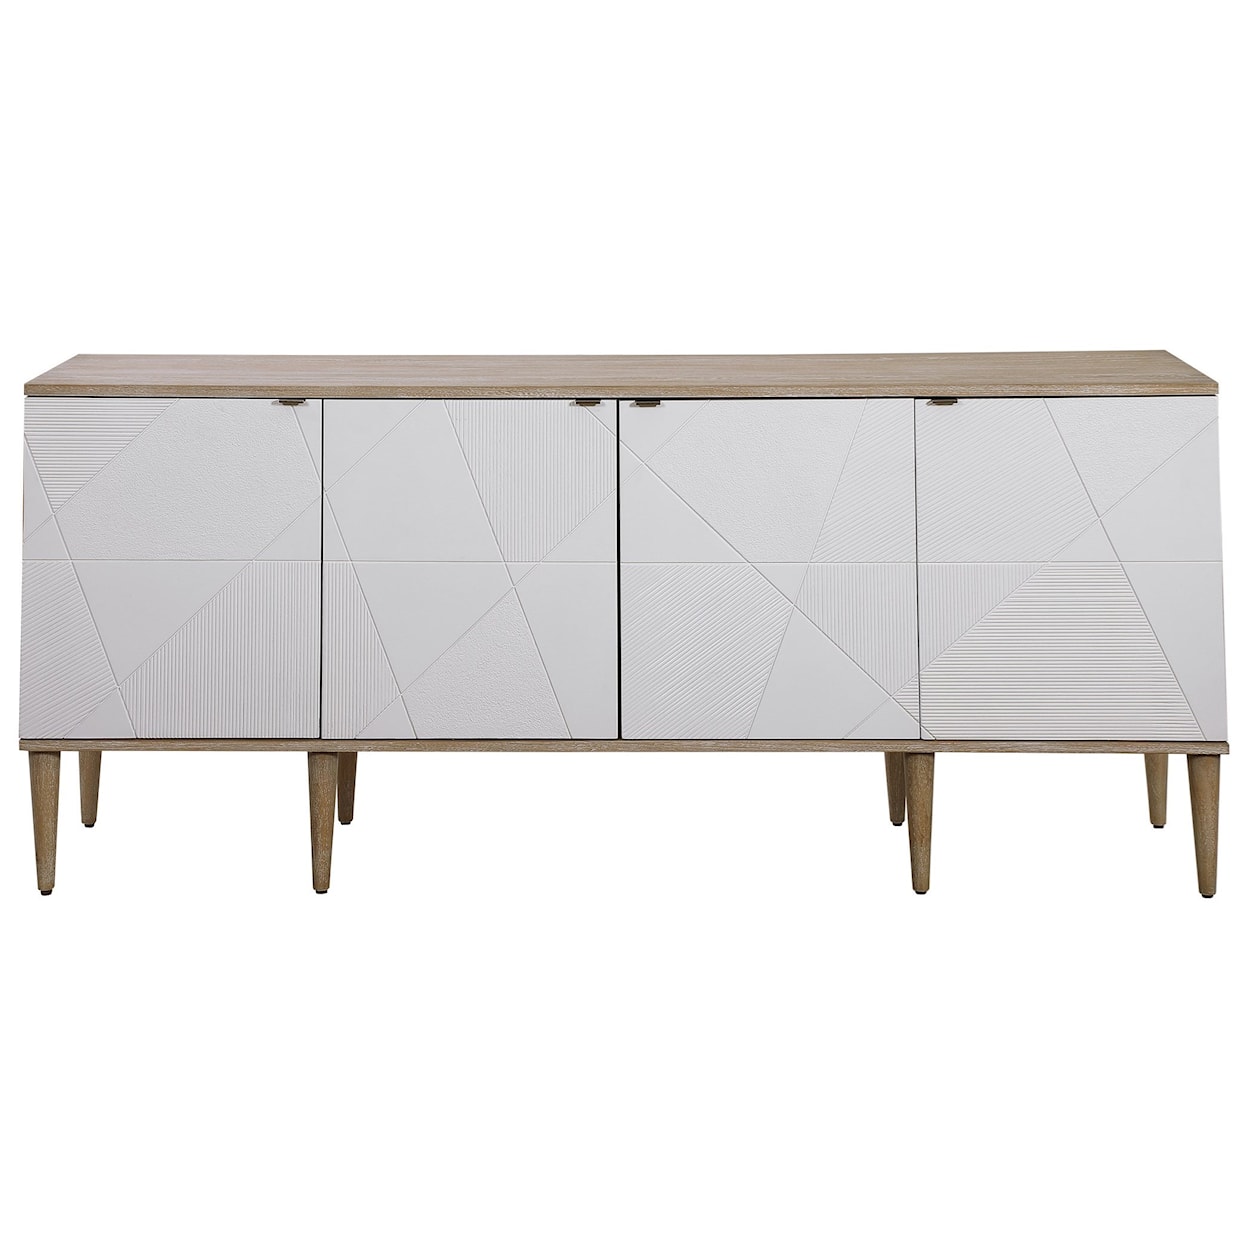 Uttermost Accent Furniture - Chests Tightrope 4-Door Modern Sideboard Cabinet